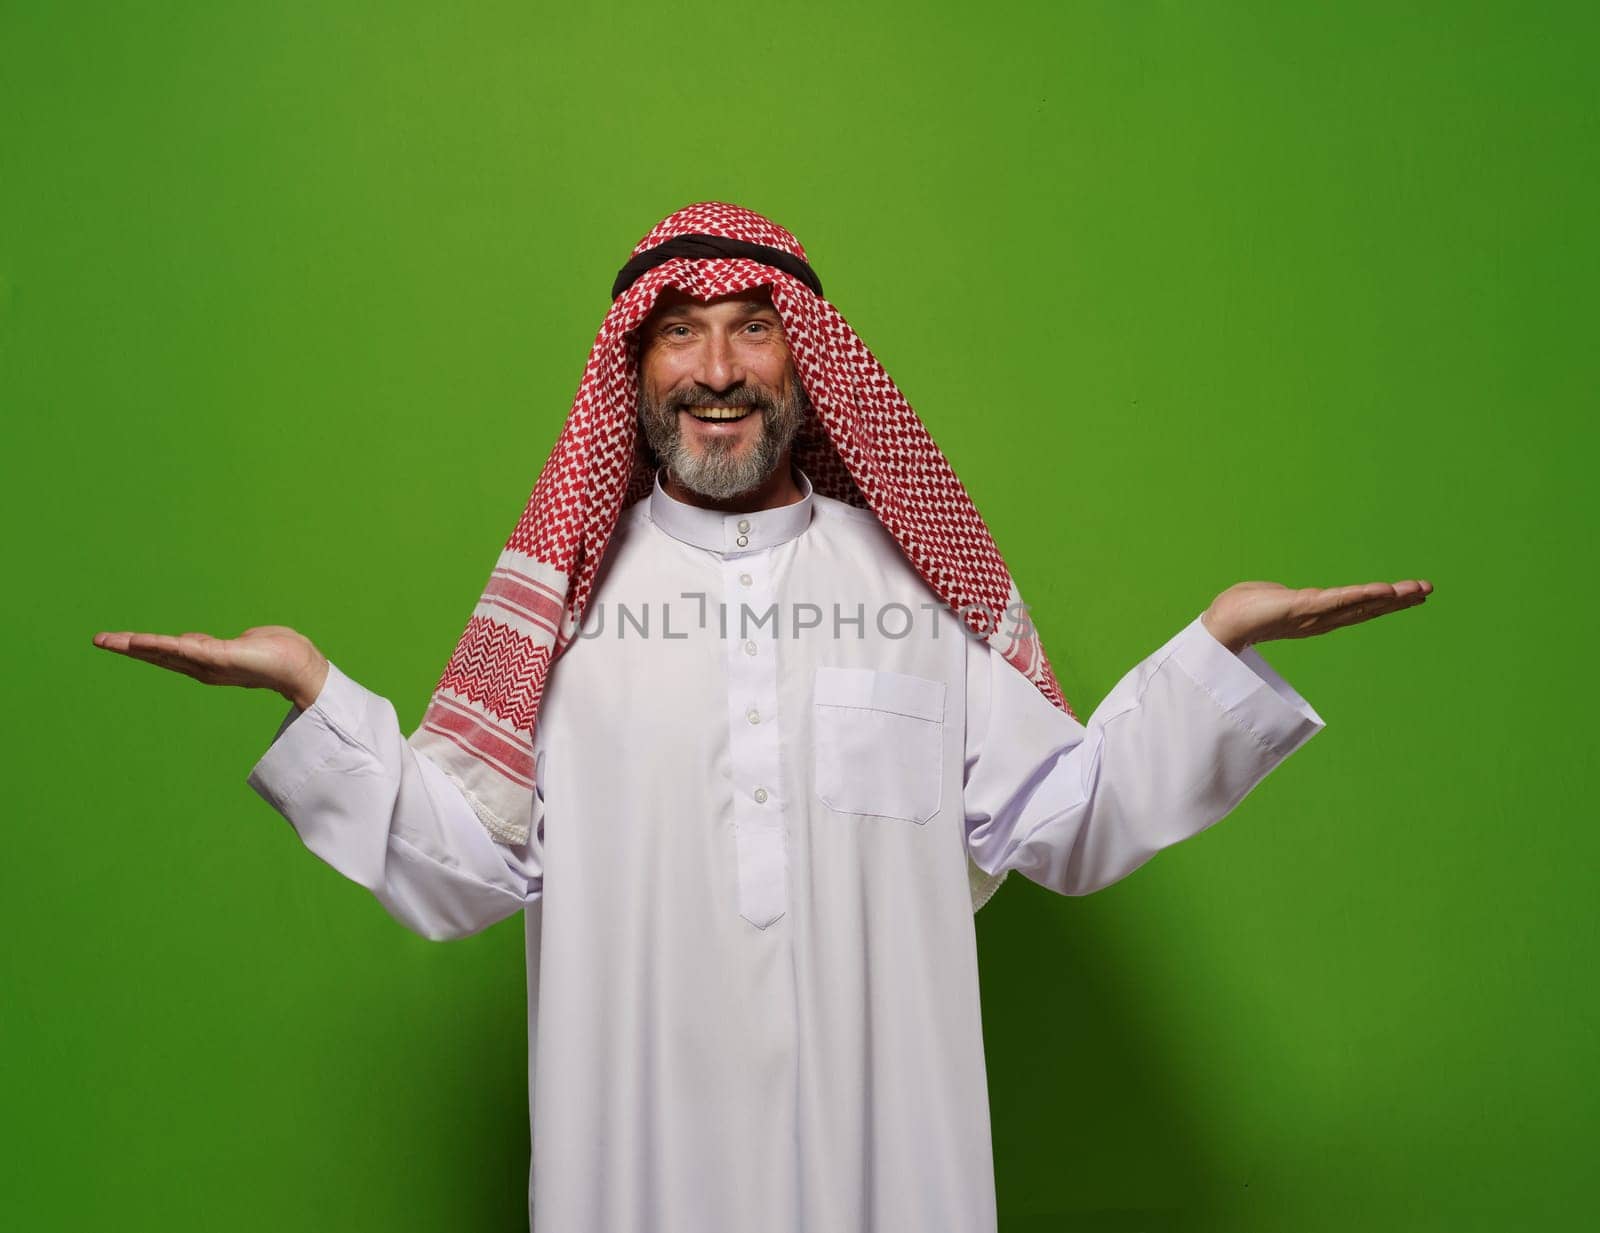 Muslim man holds two hands in gesture against green background, with empty blank copy space for text. Concept of choice and decision-making, man's contentment reflects satisfaction of making decision. High quality photo